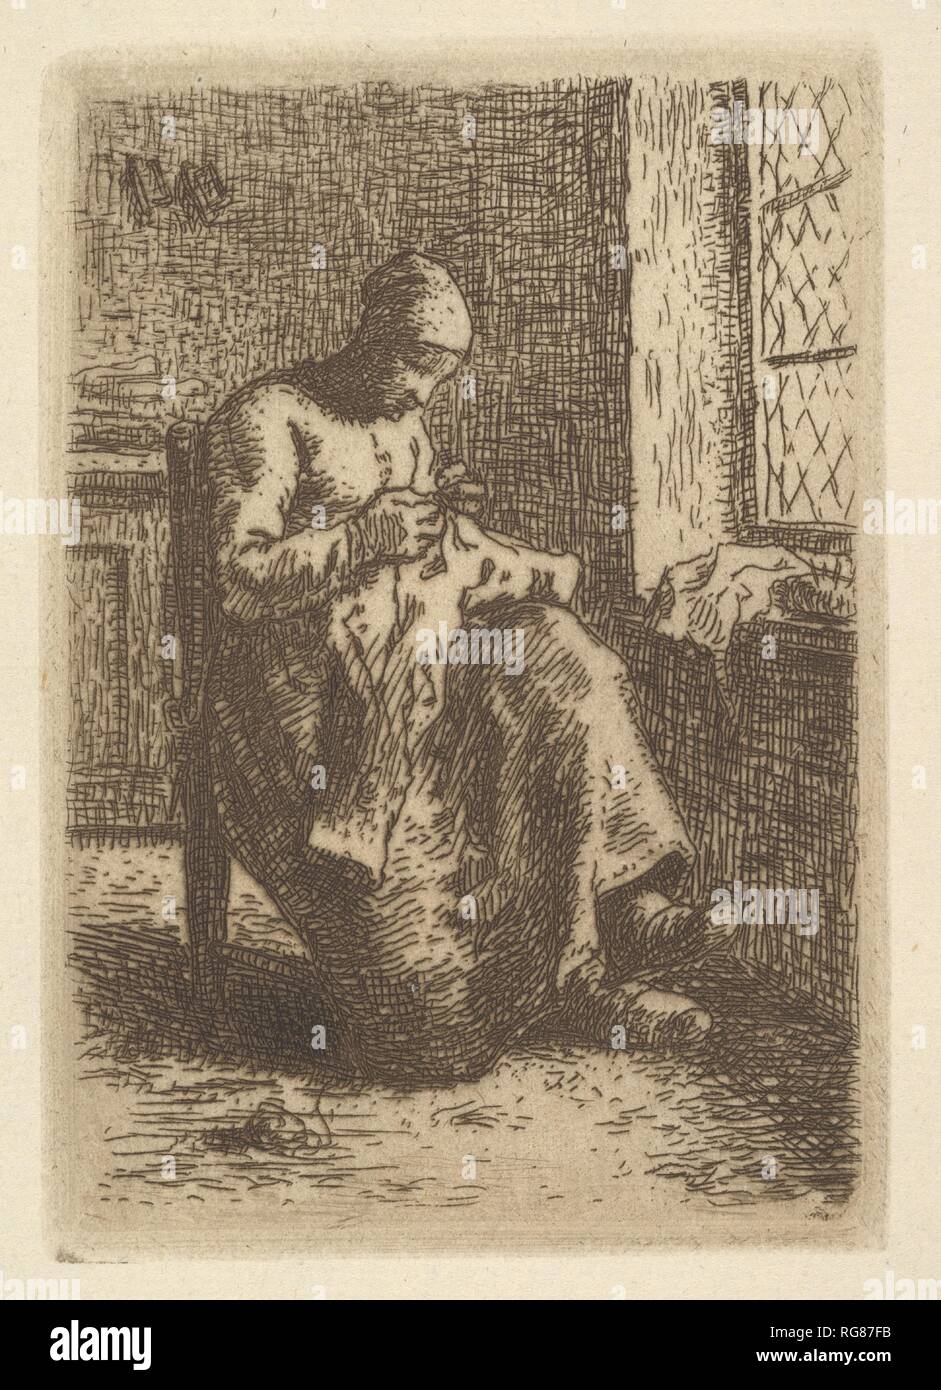 The Sewer. Artist: Jean-François Millet (French, Gruchy 1814-1875 Barbizon). Dimensions: plate: 4 3/16 x 2 7/8 in. (10.6 x 7.3 cm)  sheet: 6 7/16 x 4 3/16 in. (16.3 x 10.6 cm). Date: 1855. Museum: Metropolitan Museum of Art, New York, USA. Stock Photo